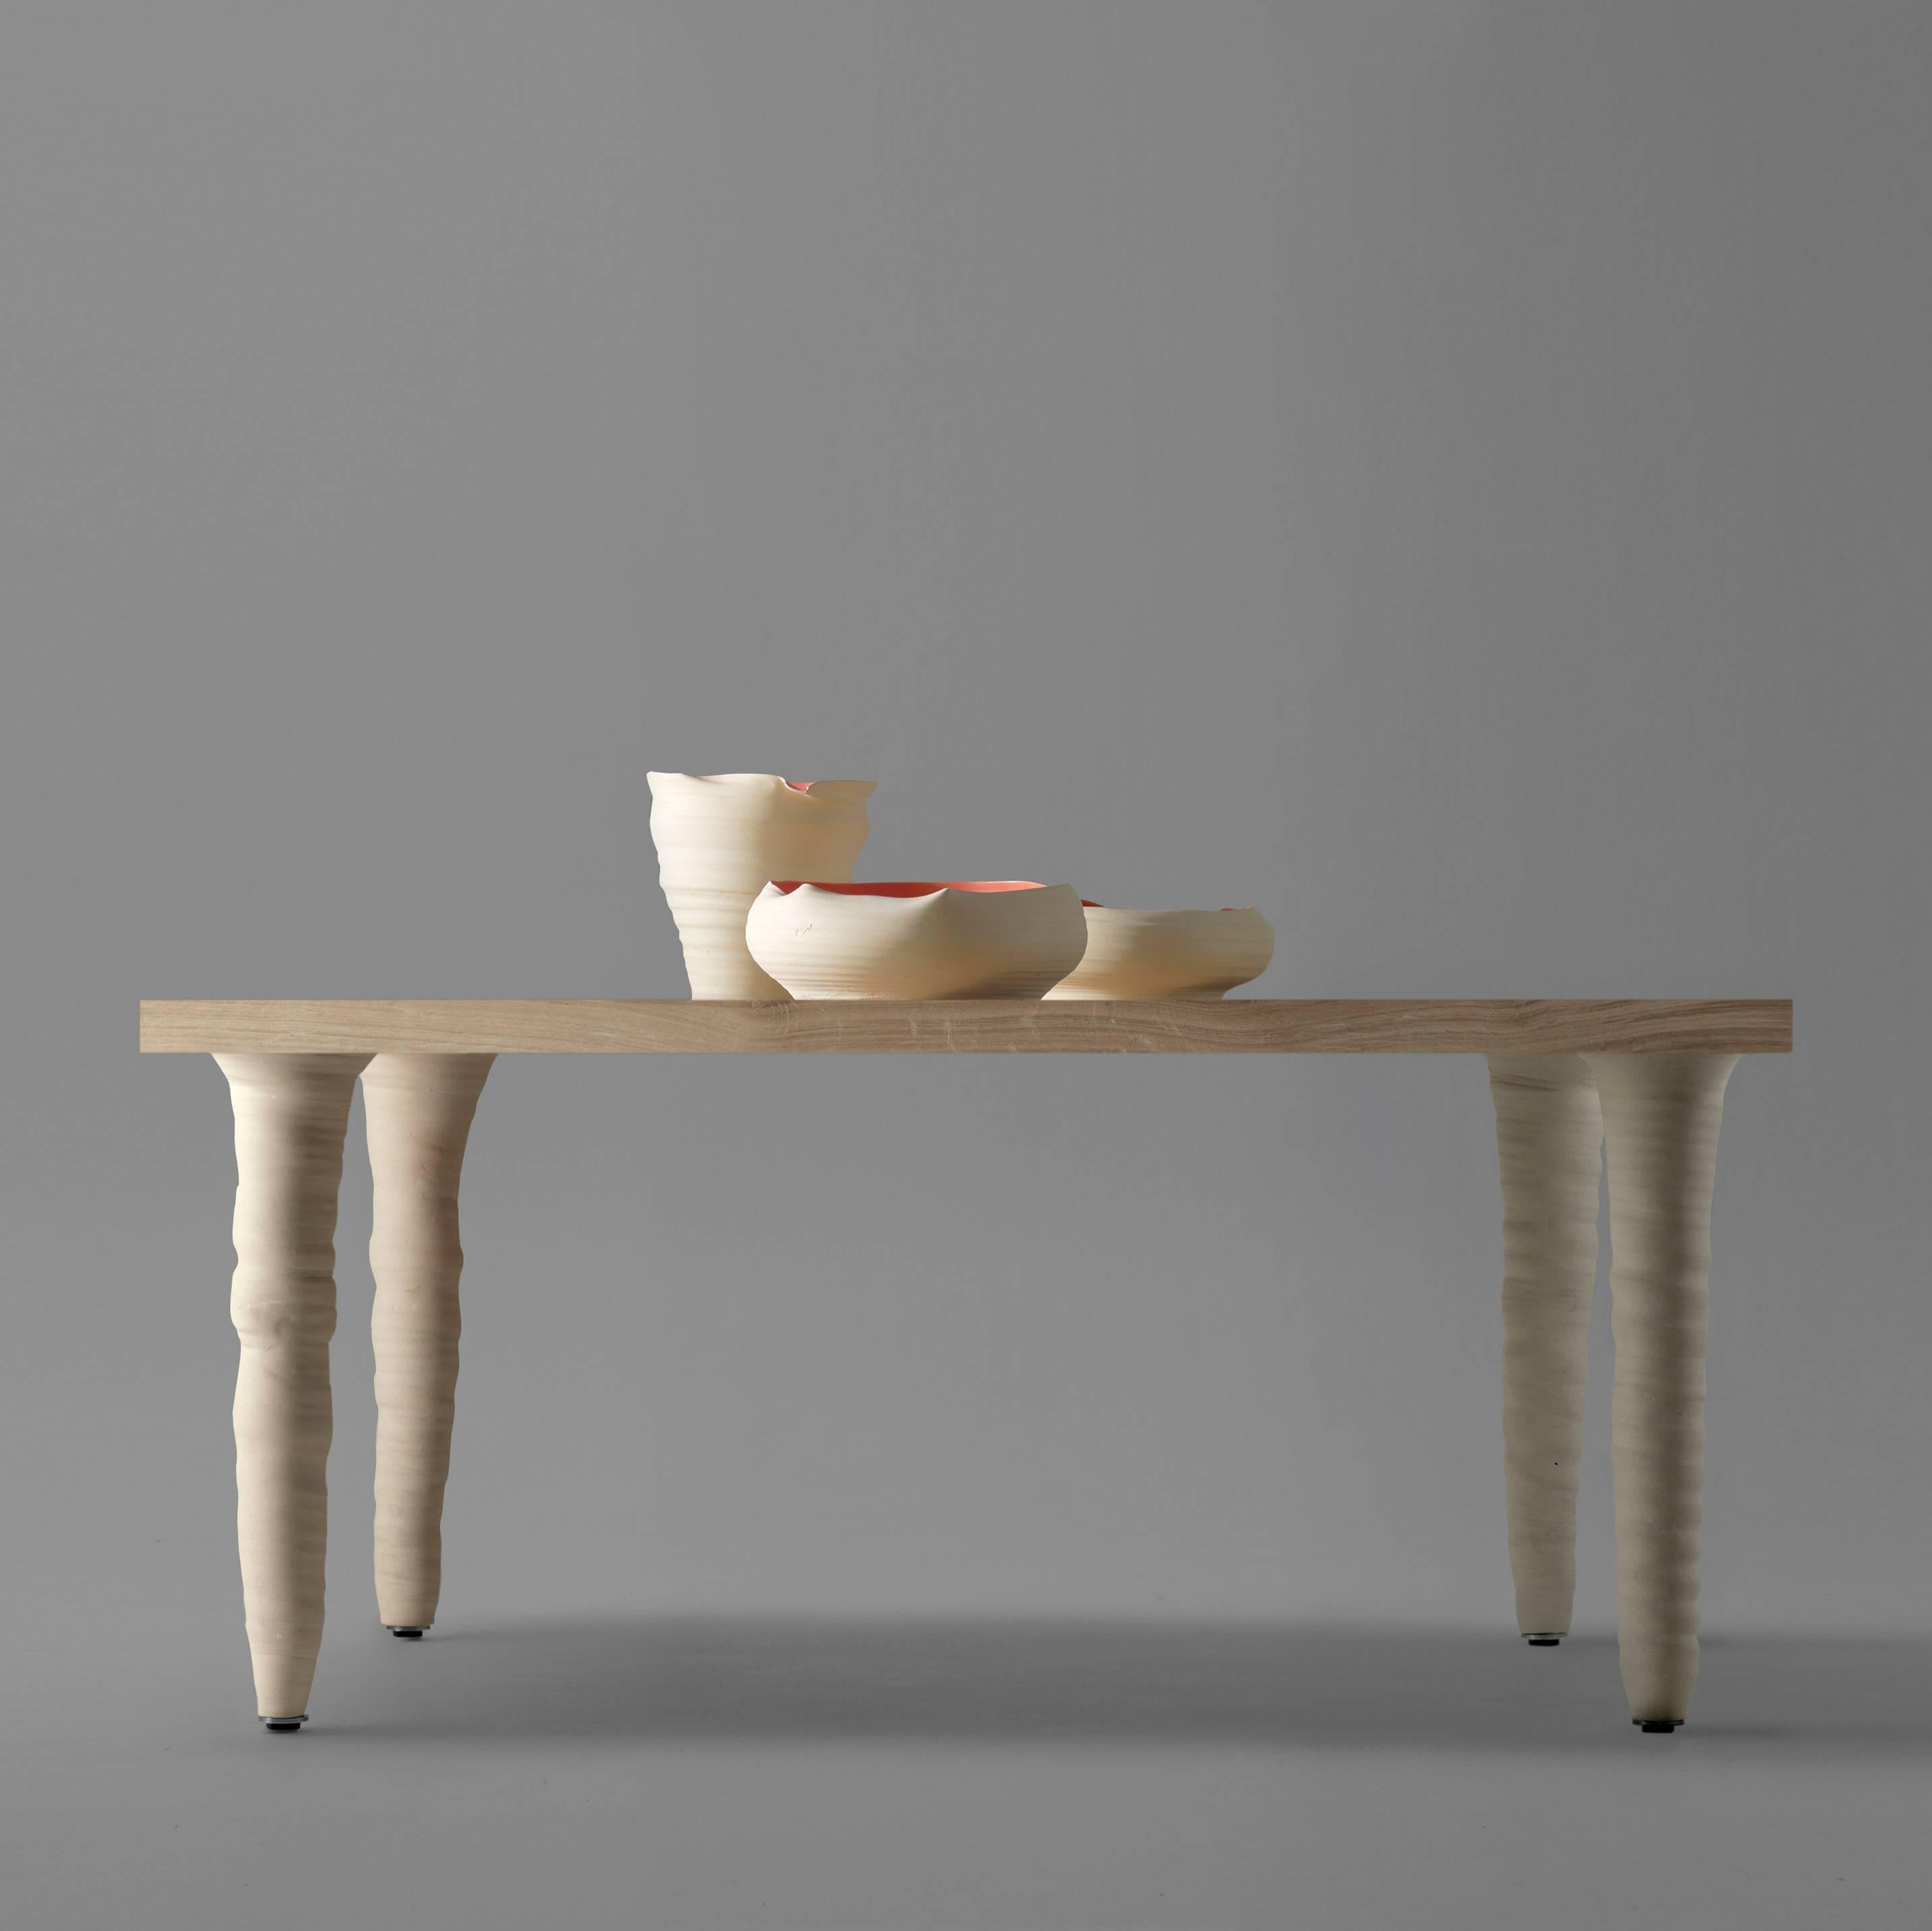 Spanish Fang Table by Xavier Mañosa for BD Barcelona